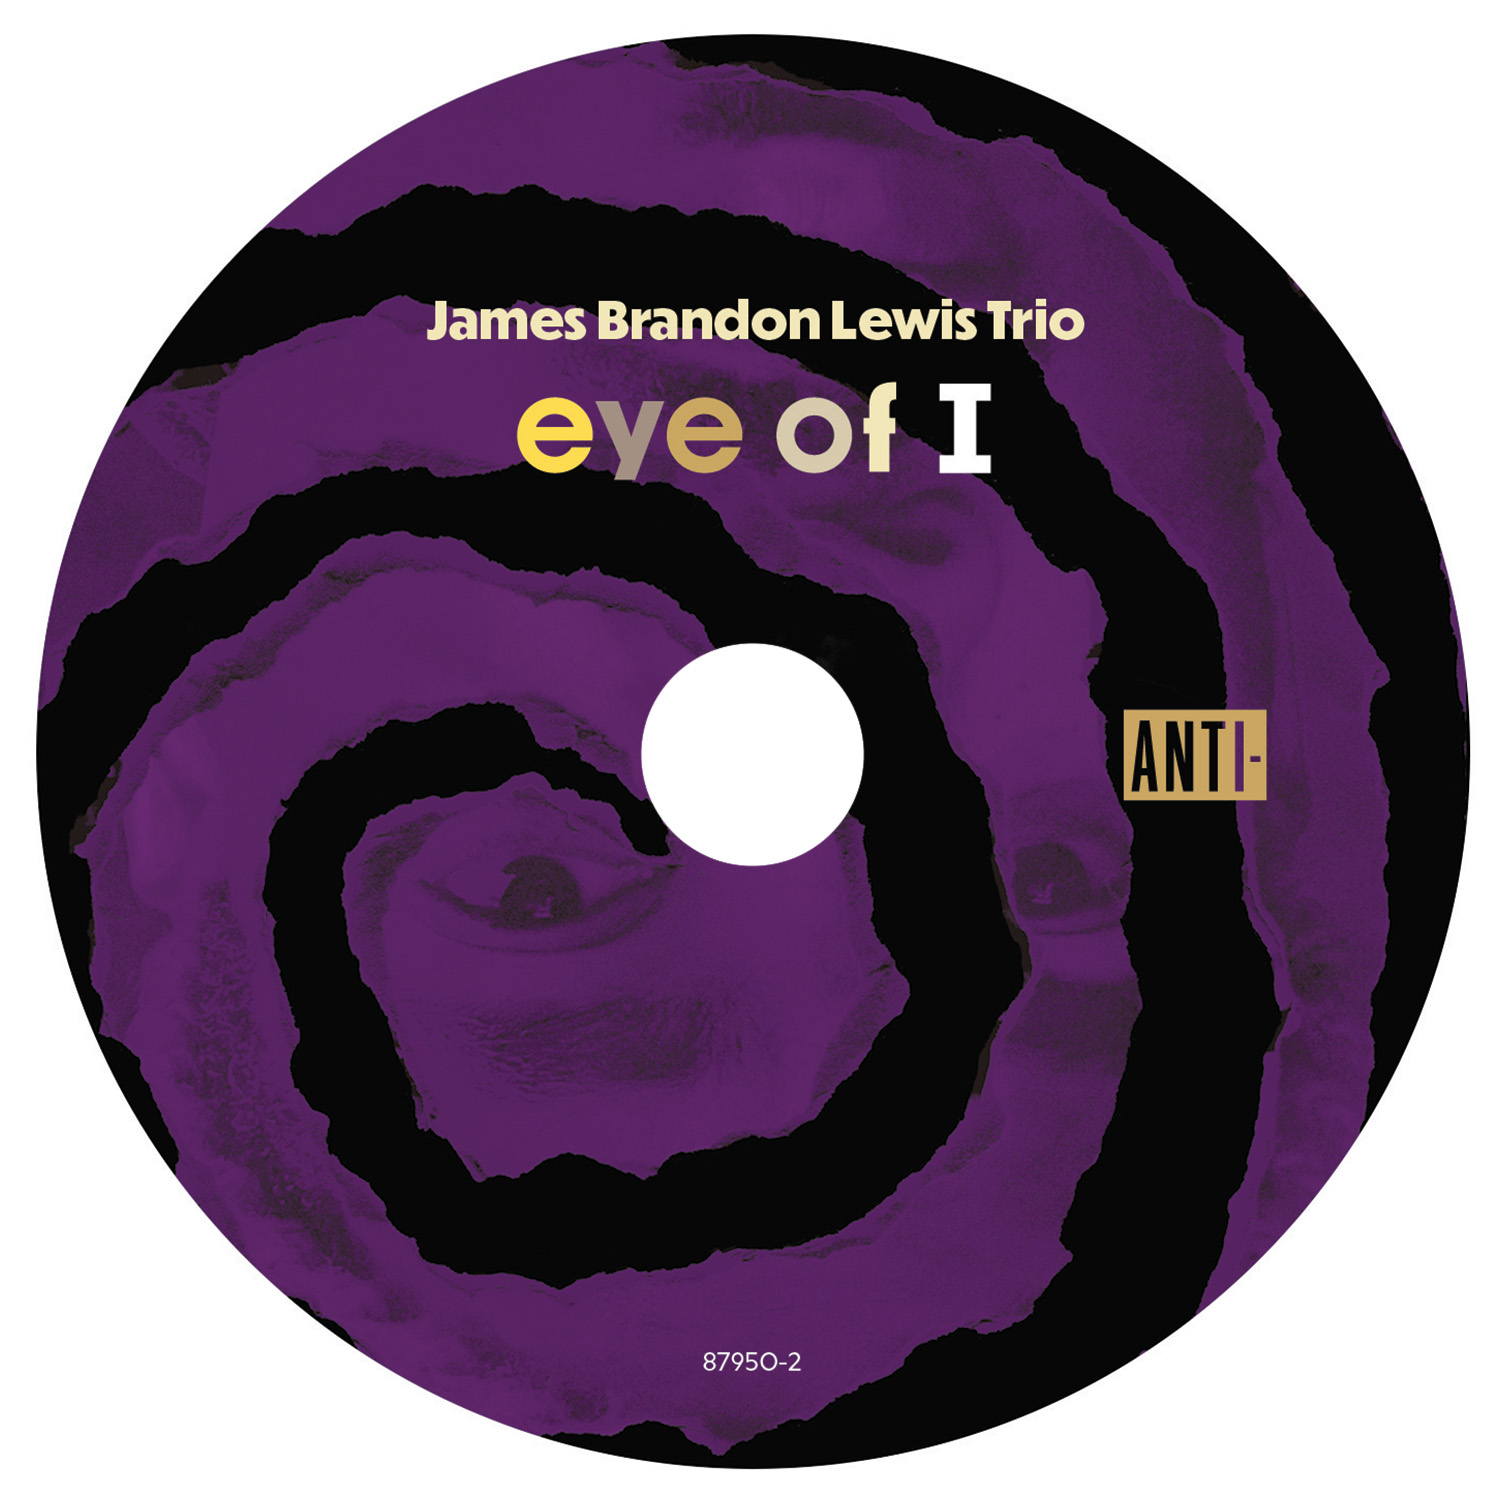 cd disc design for Eye of I by the James Brandon Lewis Trio